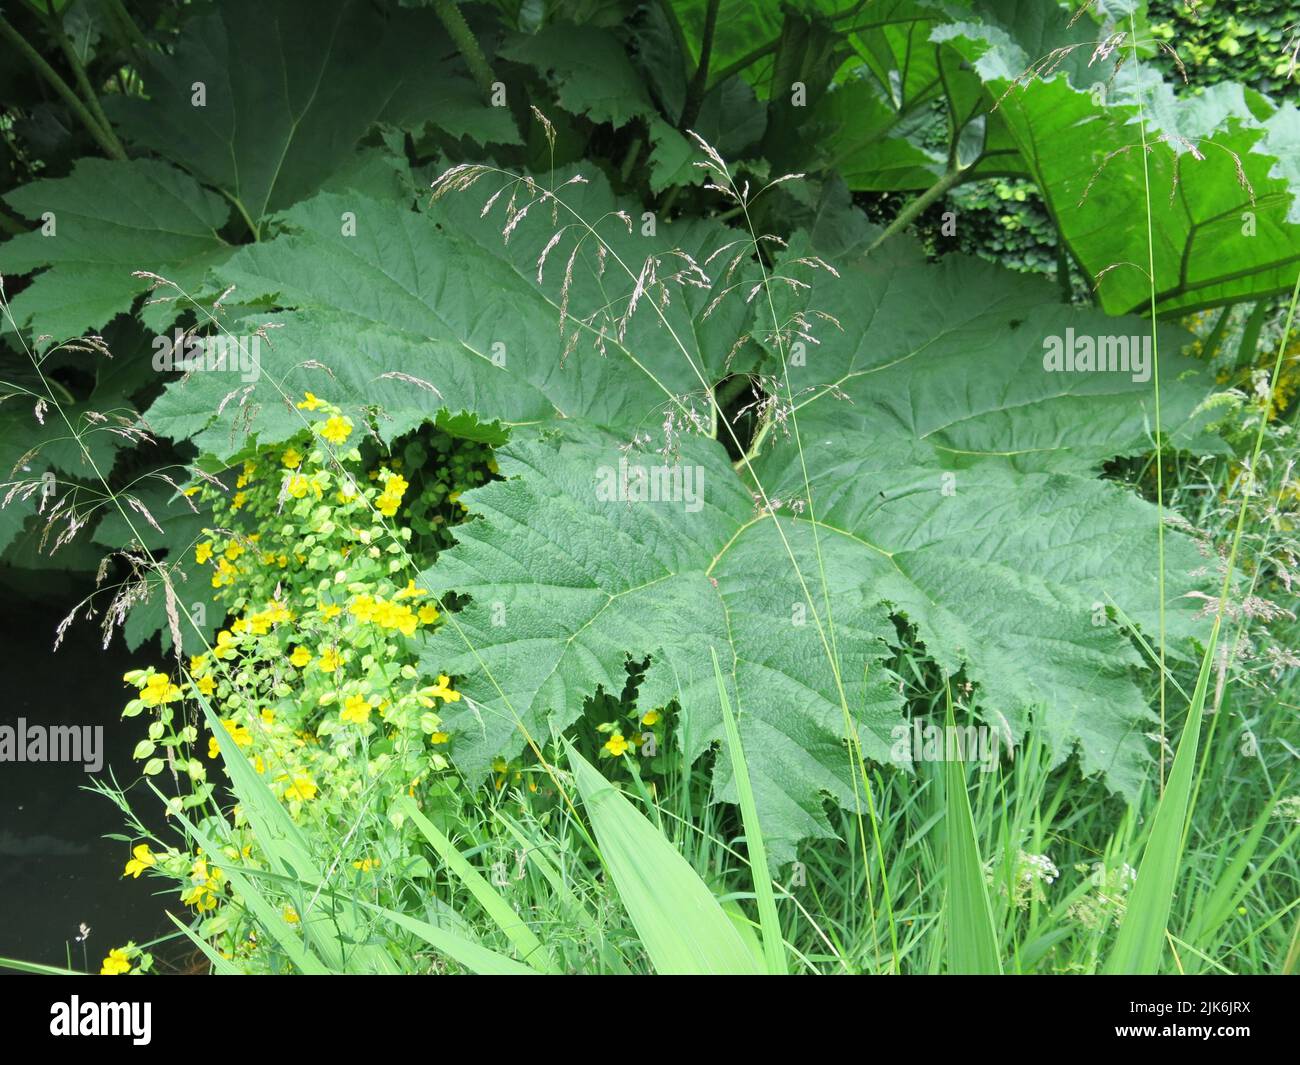 A giant leaf of gunnera or Chilean Rhubarb, growing in the wilder, boggy part of a Scottish garden. Stock Photo